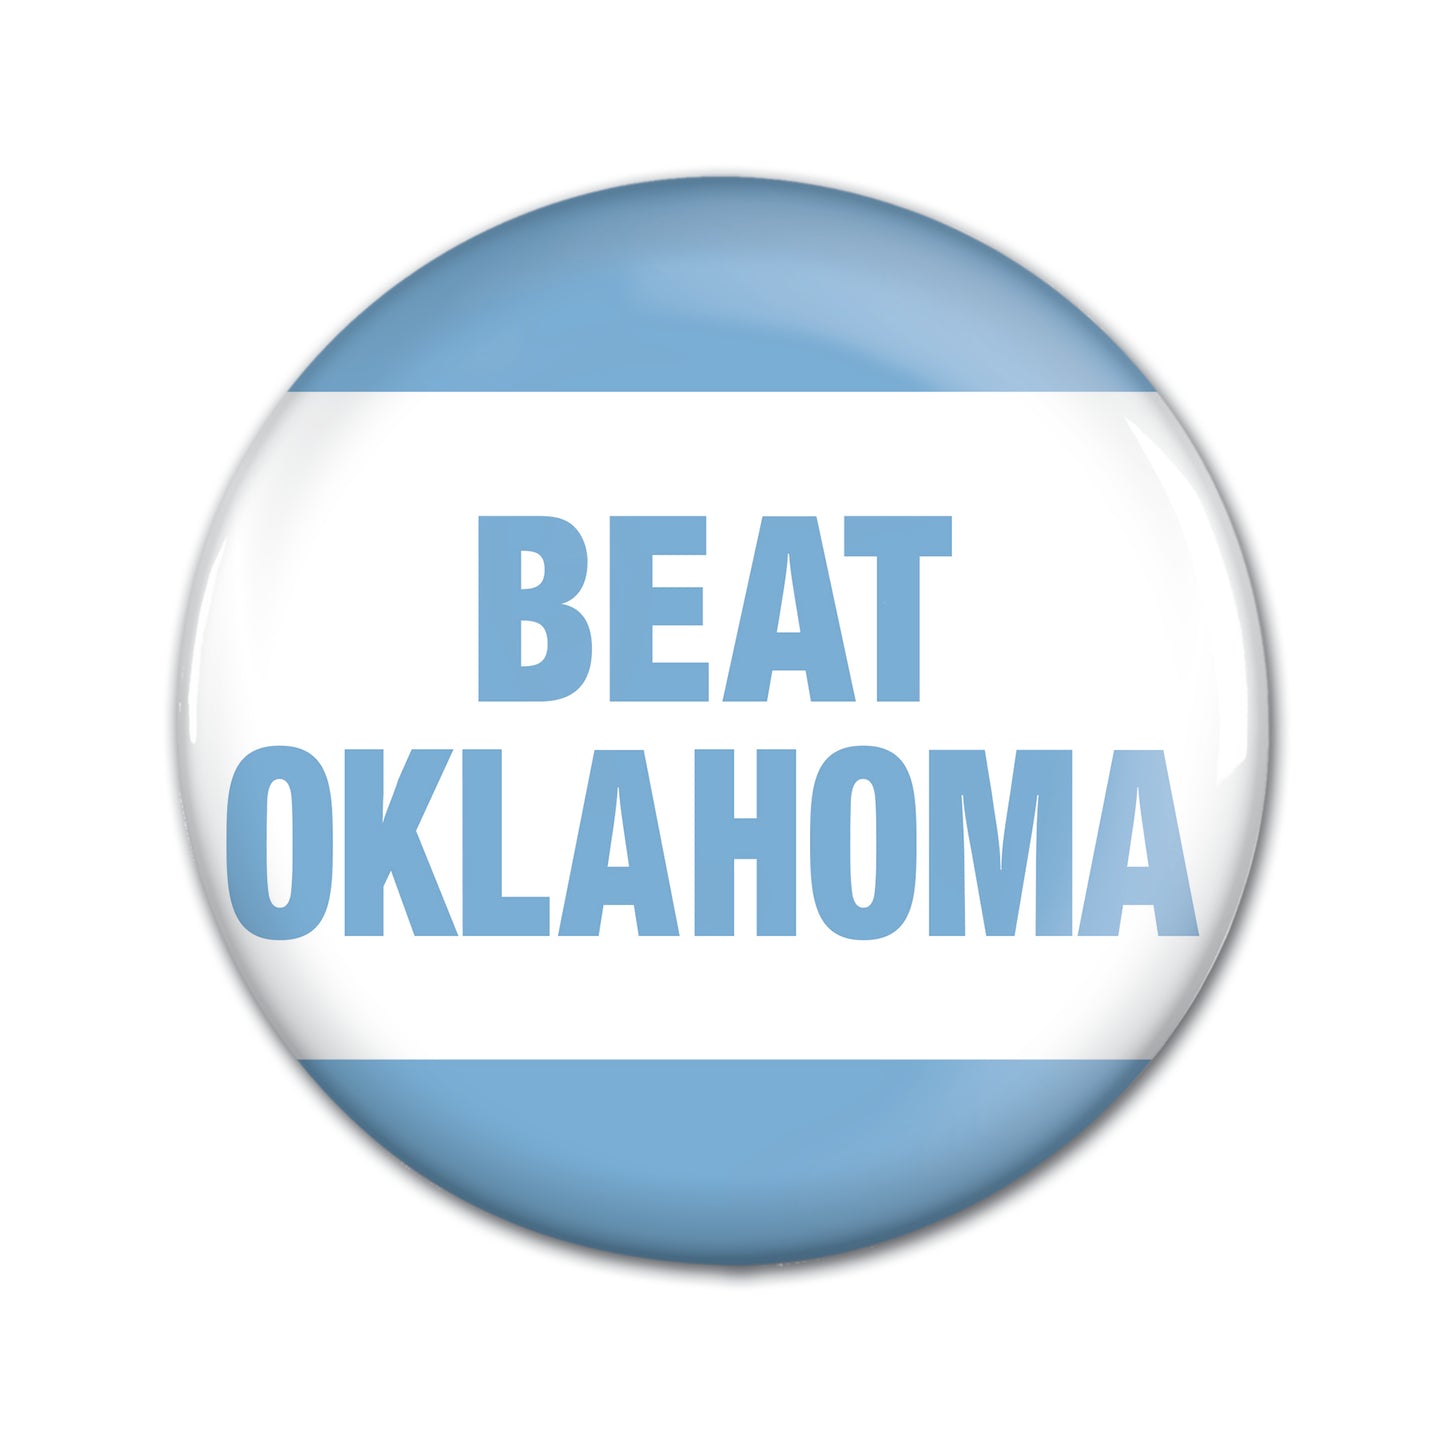 Beat Oklahoma Pins for Game Day